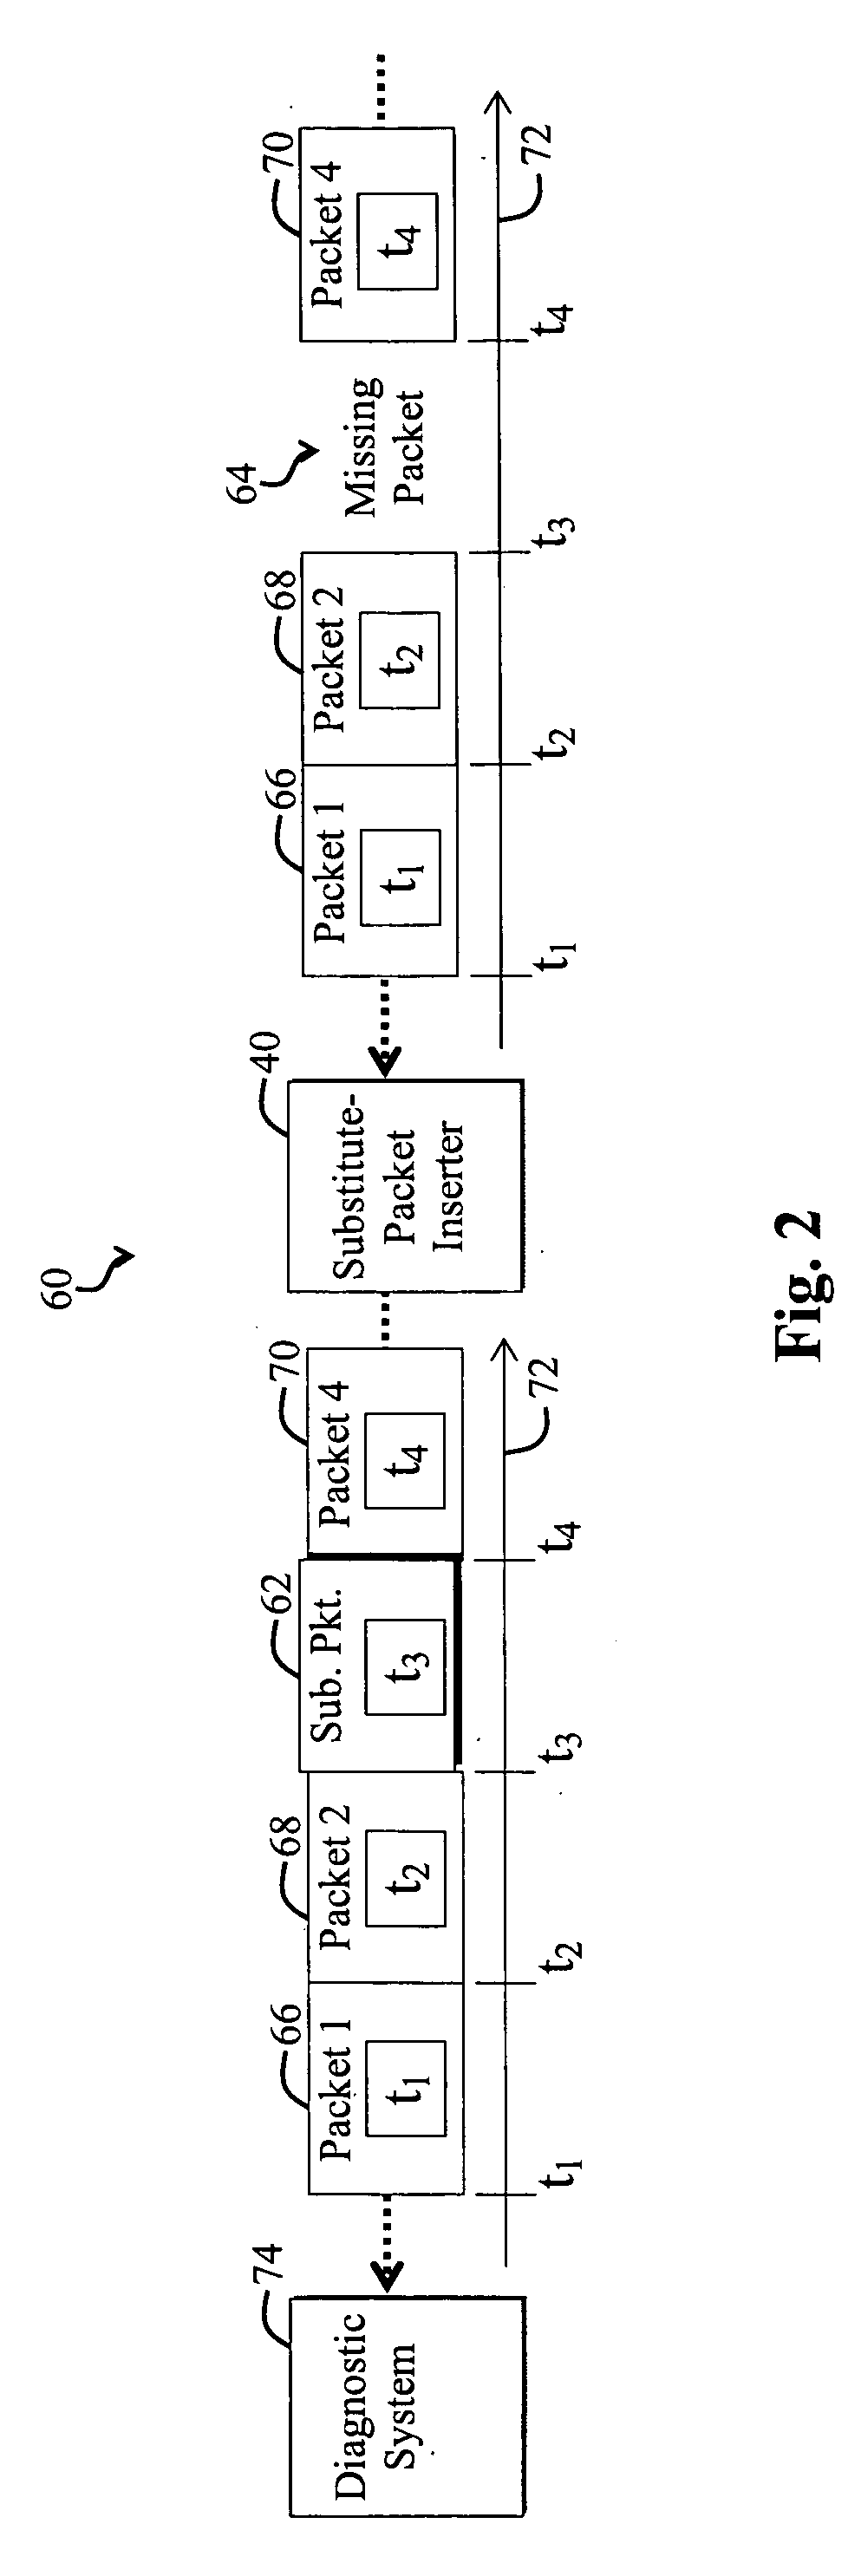 System and method for facilitating network performance analysis